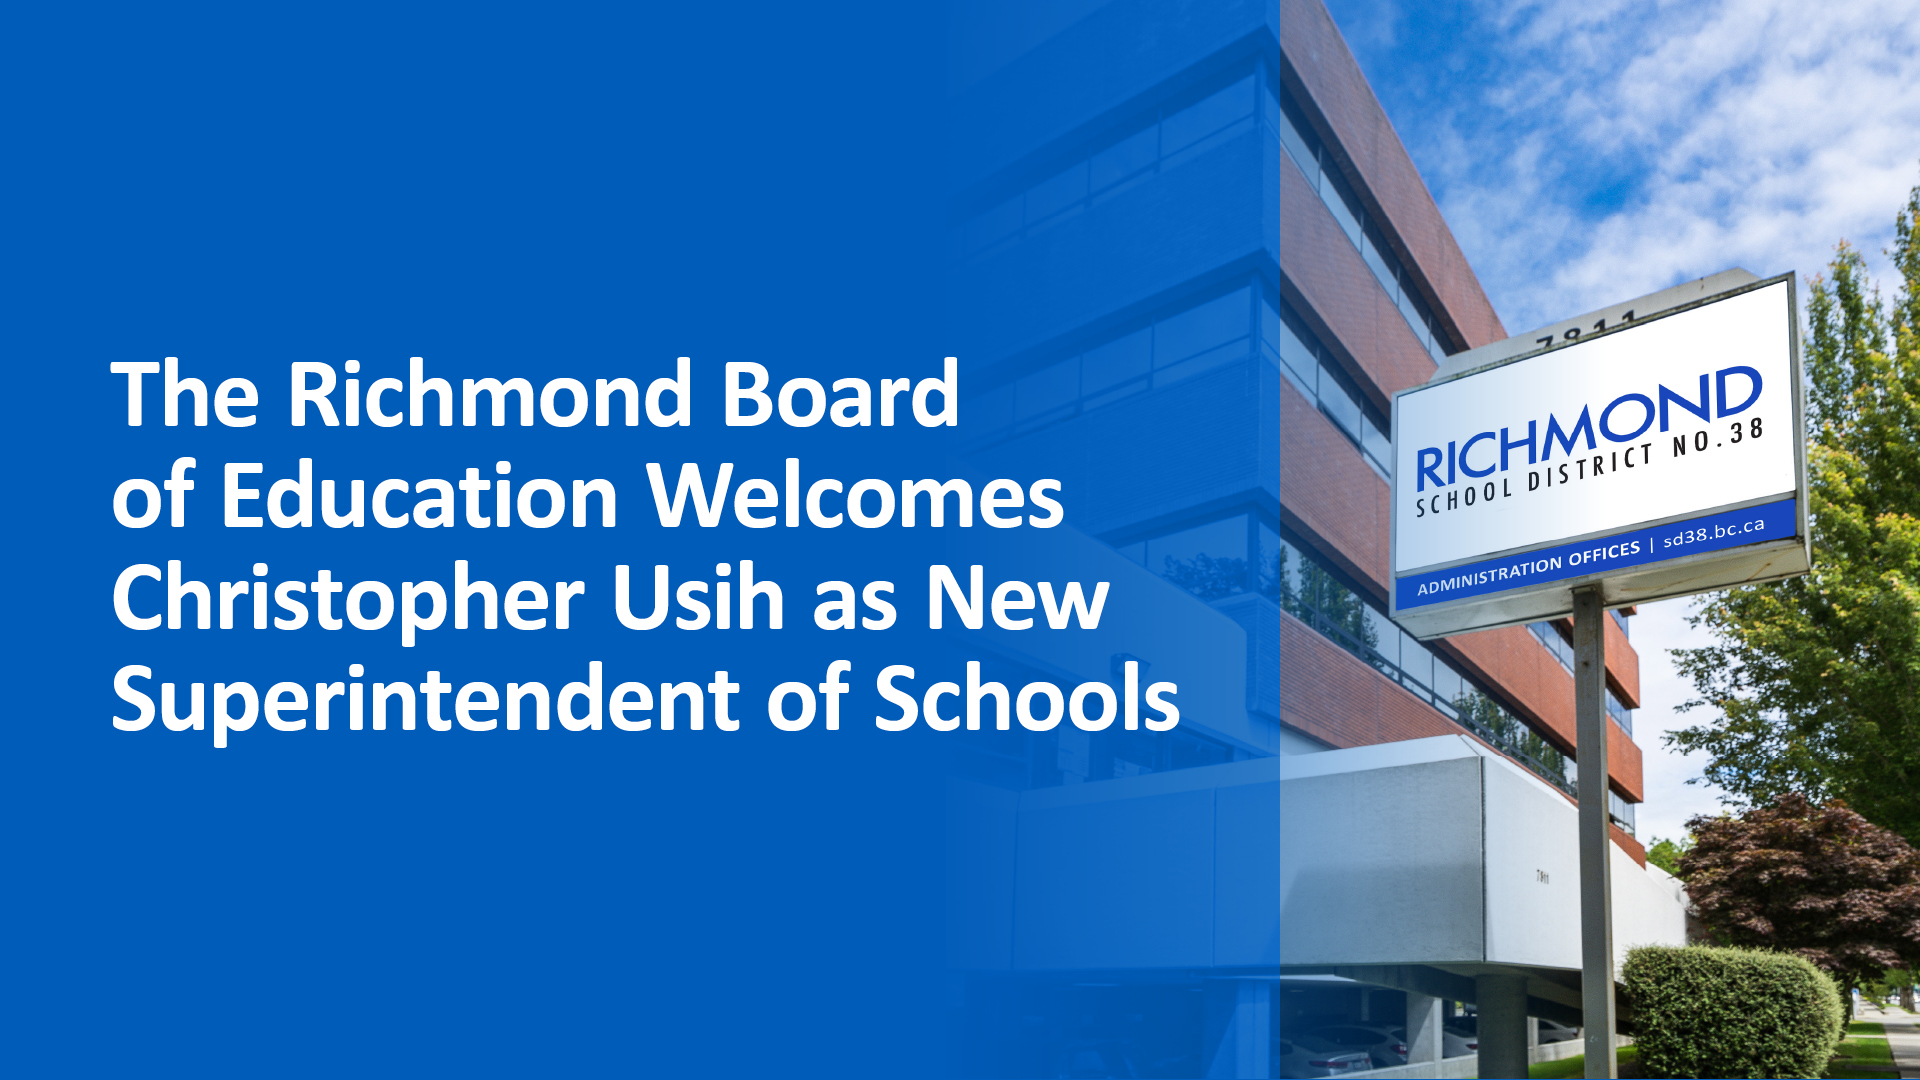 Richmond Board of Education Welcomes Christopher Usih as New Superintendent of Schools